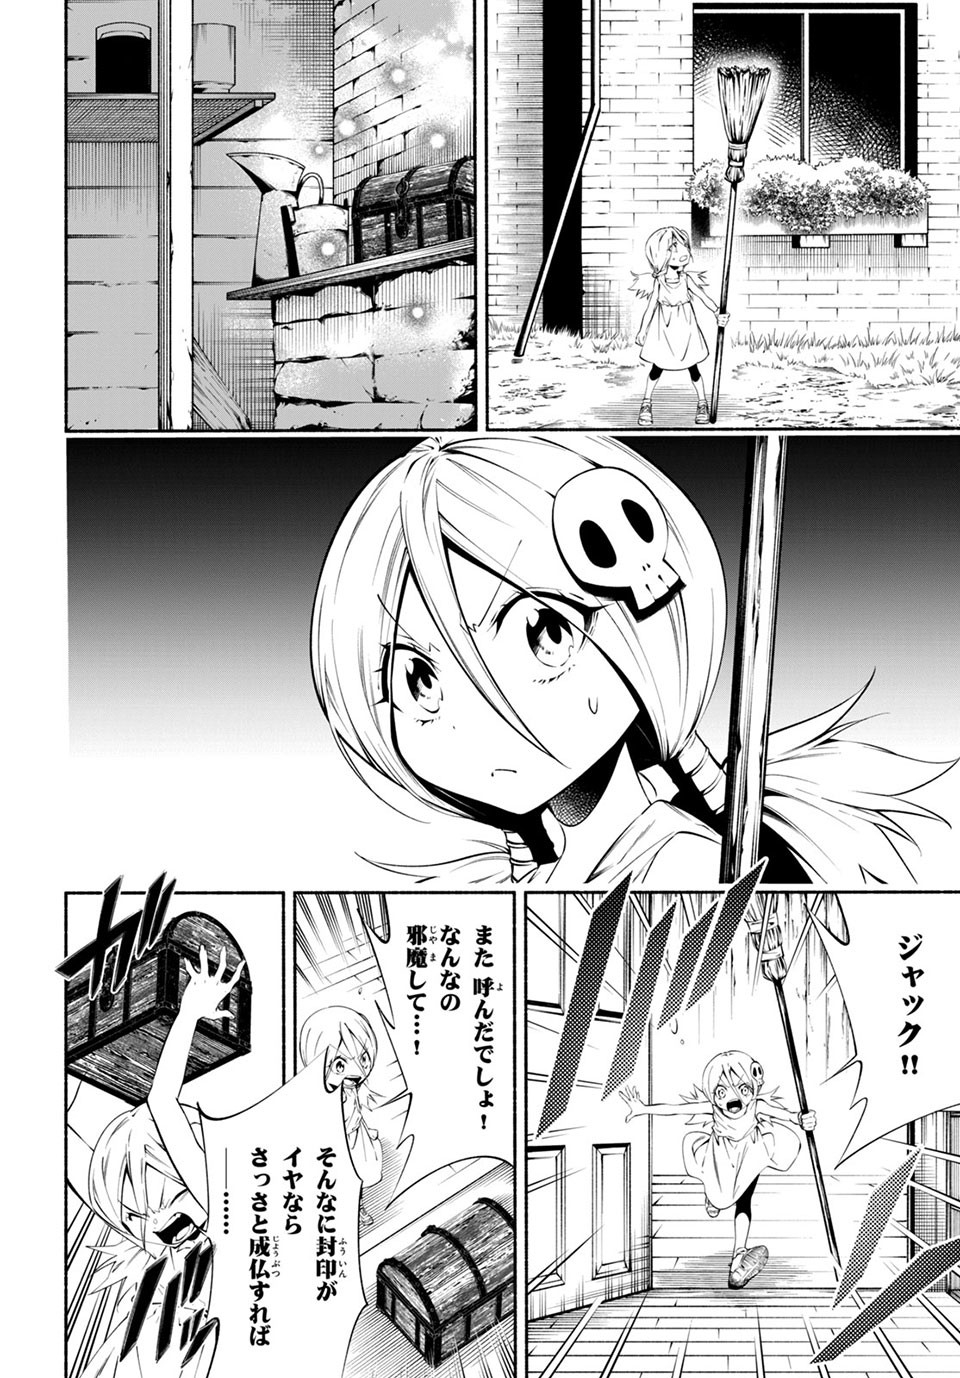 Shaman King: and a garden 第7.3話 - Page 5